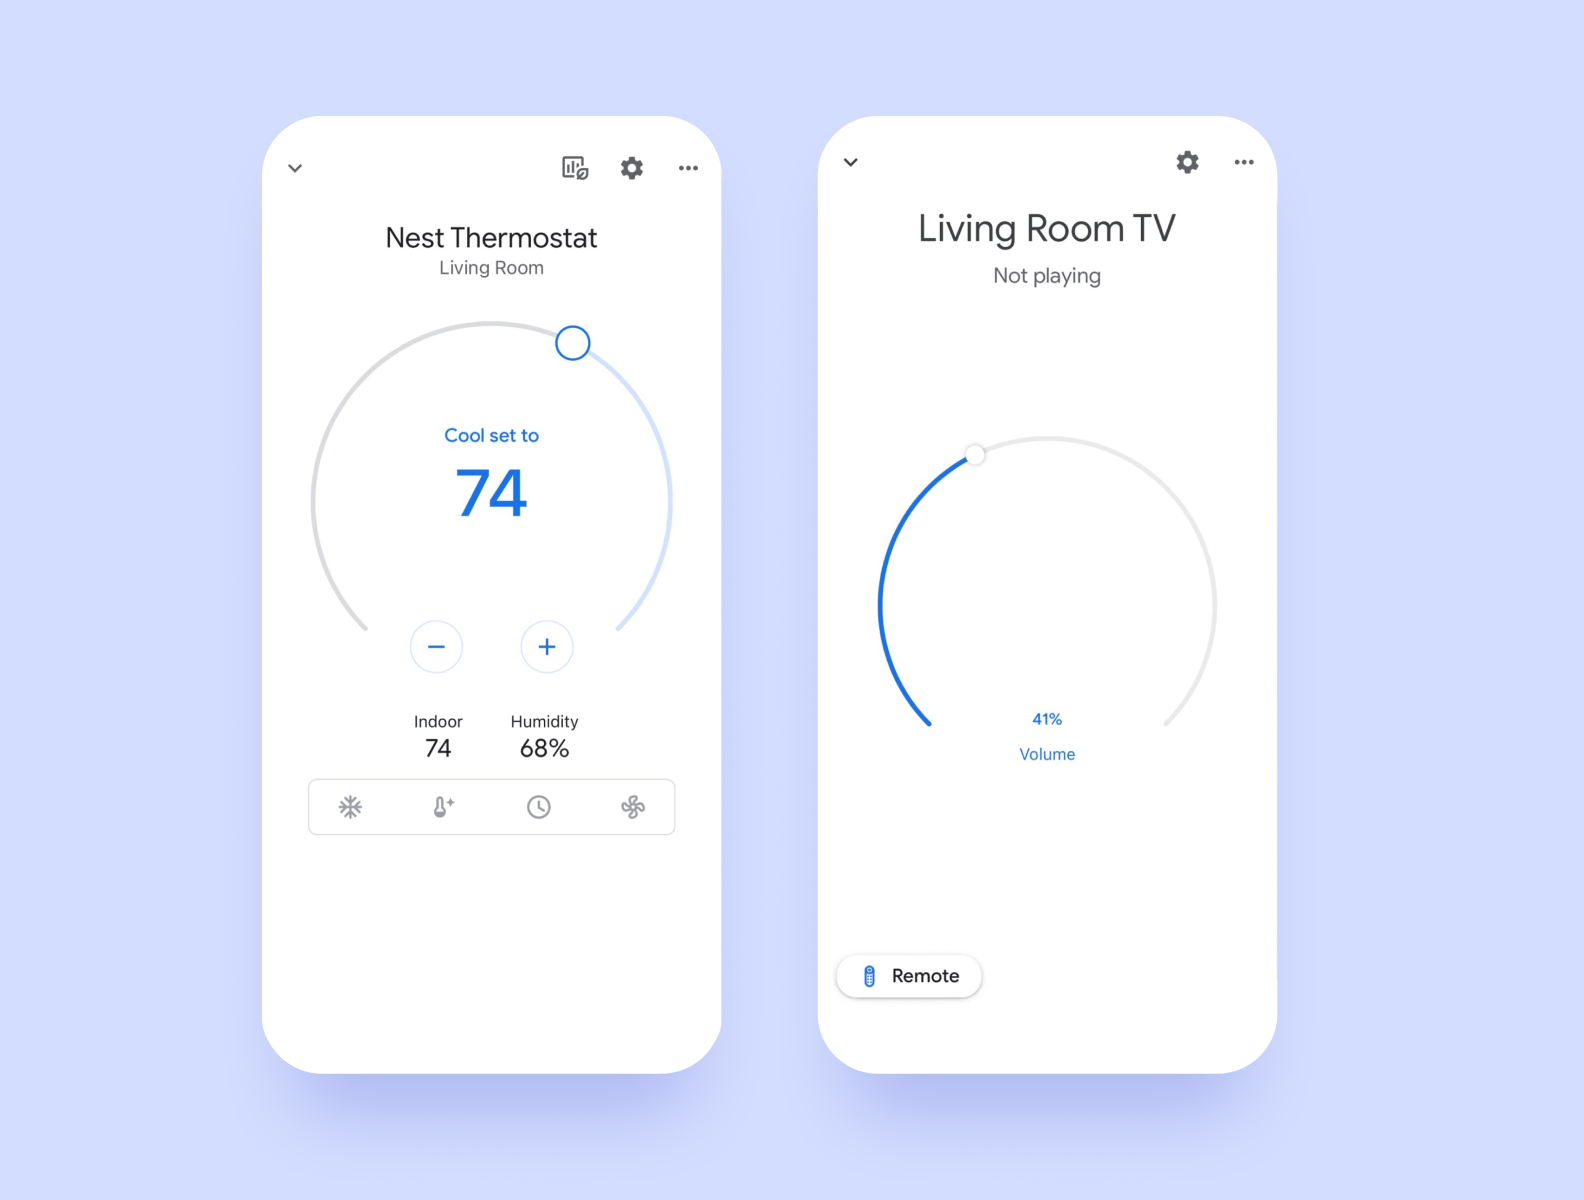 The main screens of the Google Home app